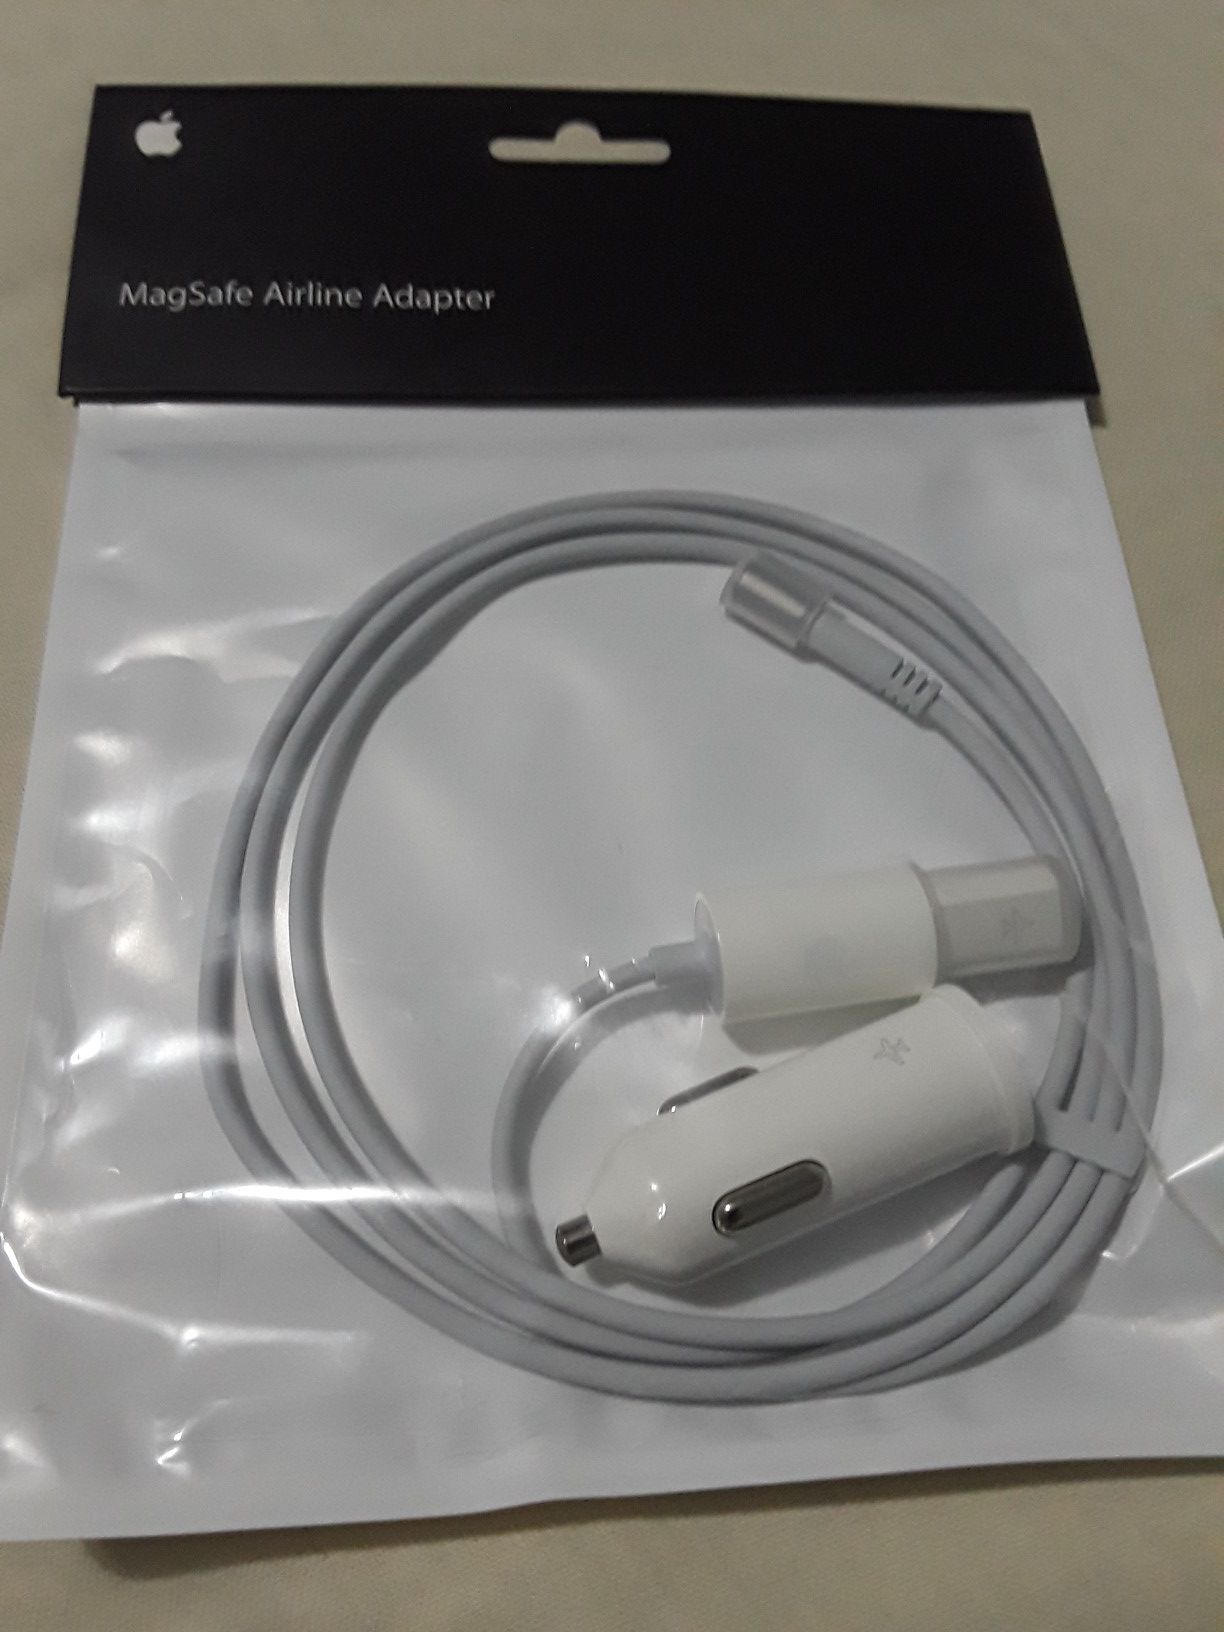 MagSafe Airline Adapter